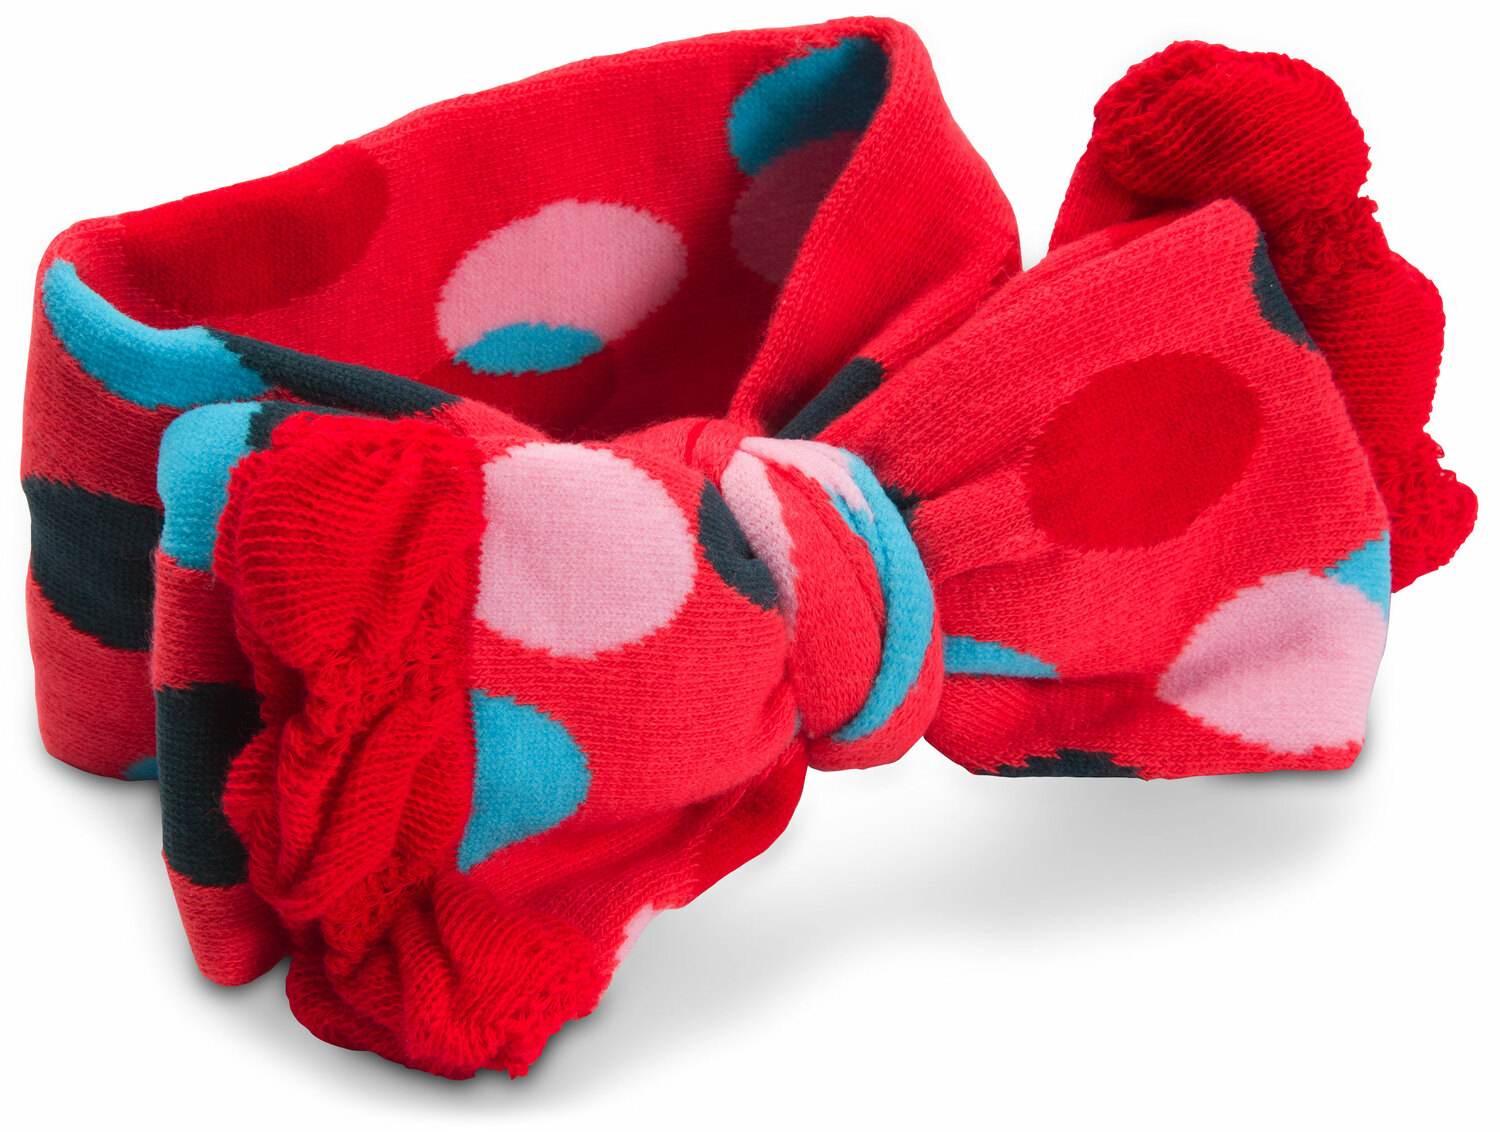 Coral and Blue Polka Dot by Izzy & Owie - Coral and Blue Polka Dot - Ruffled Knitted Headband